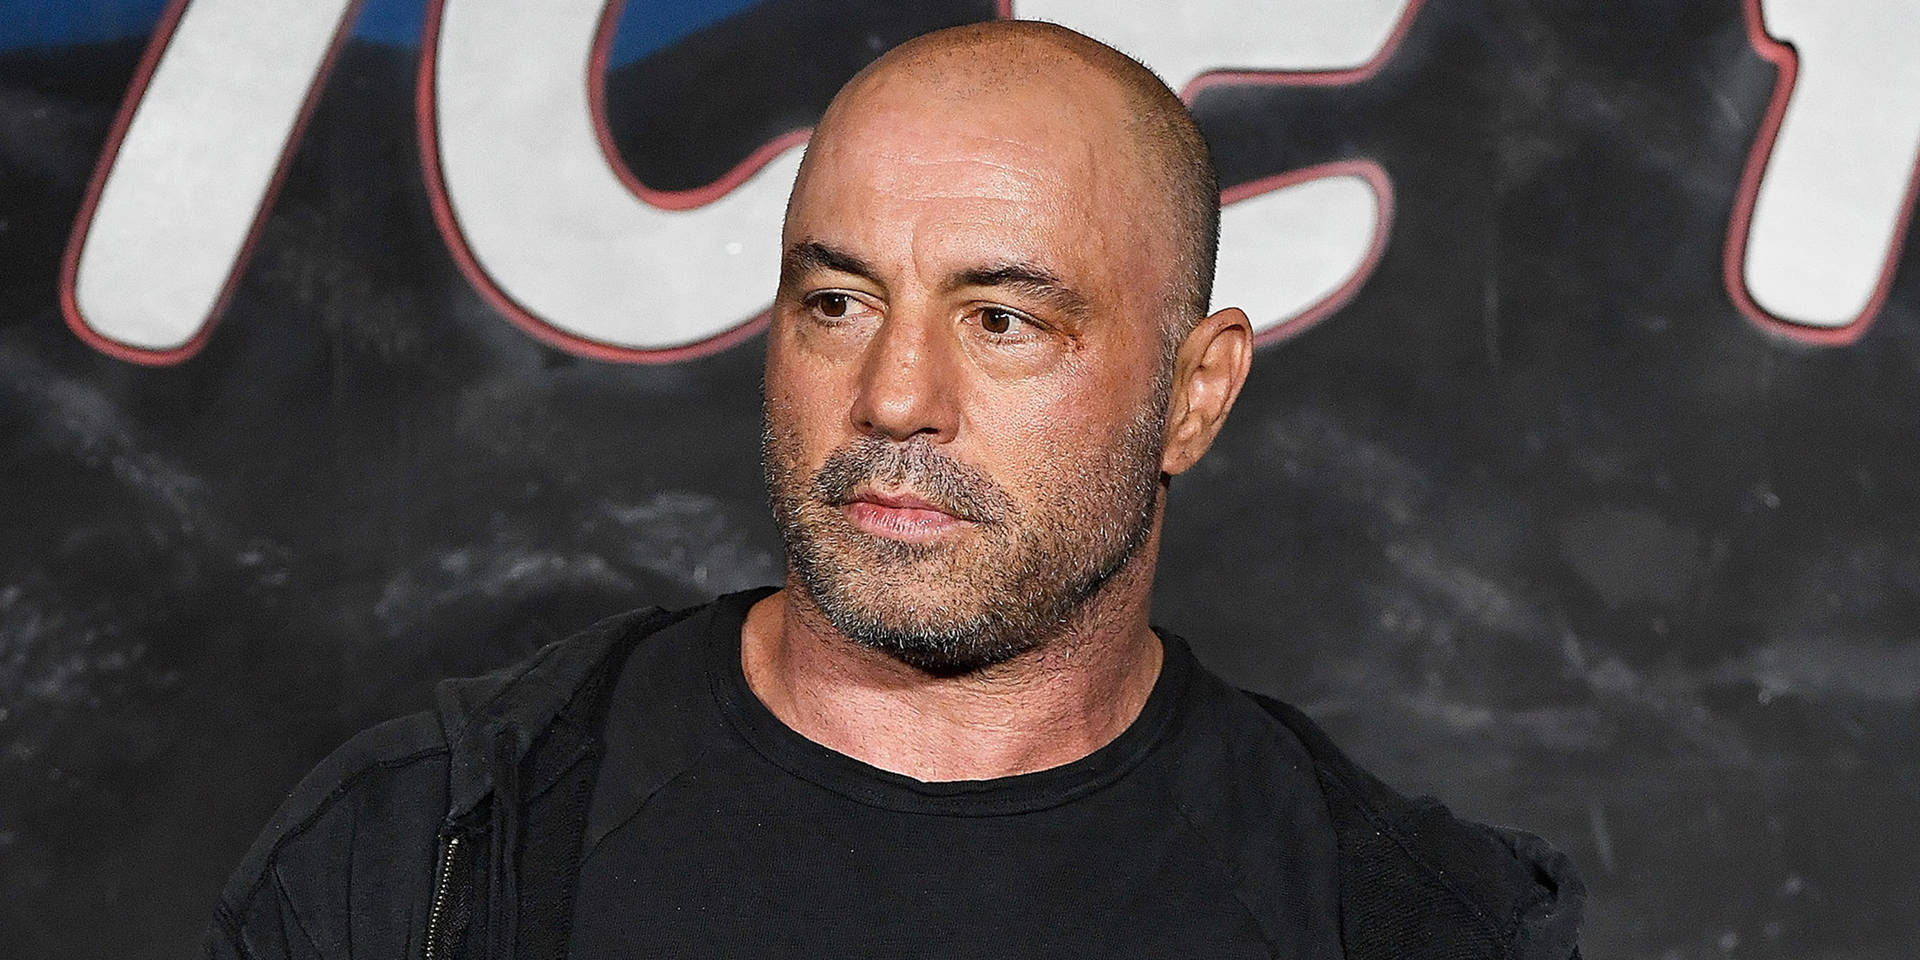 Joe Rogan Engaged in a Lively Conversation at a Public Event Wallpaper